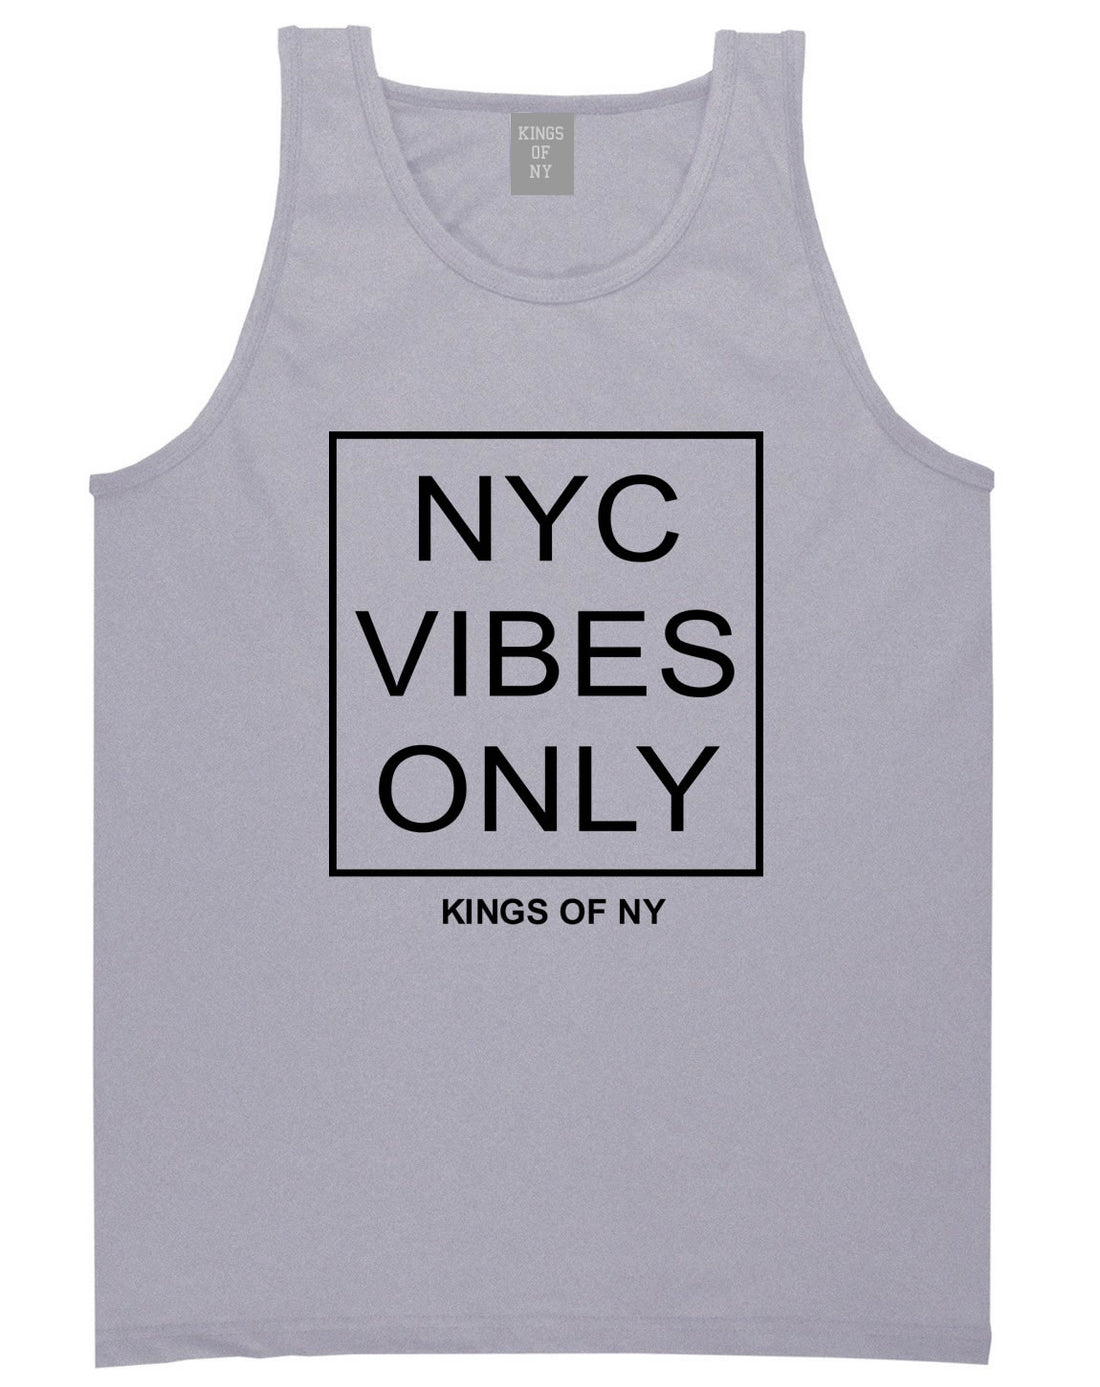 NYC Vibes Only Good Tank Top